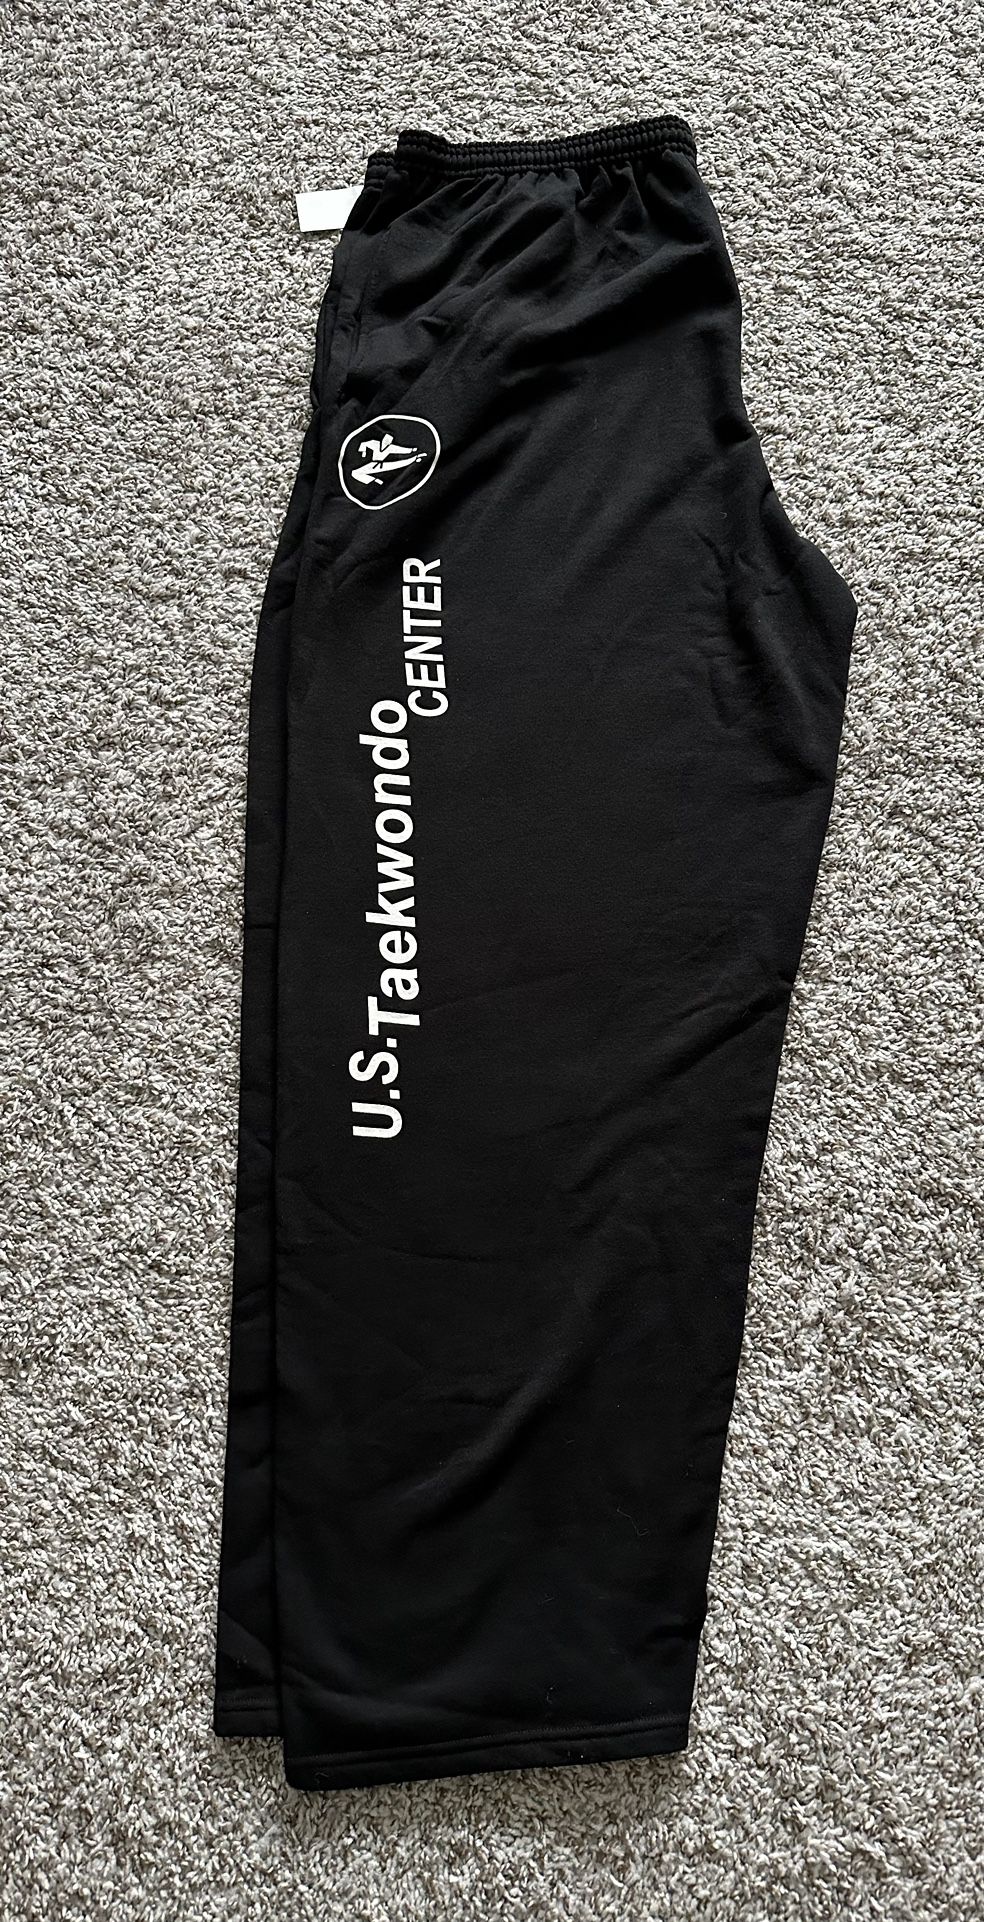 Champion XXXL Black Joggers / Sweat Pants- New With Tags - 3 Pairs Available- $15 Each 